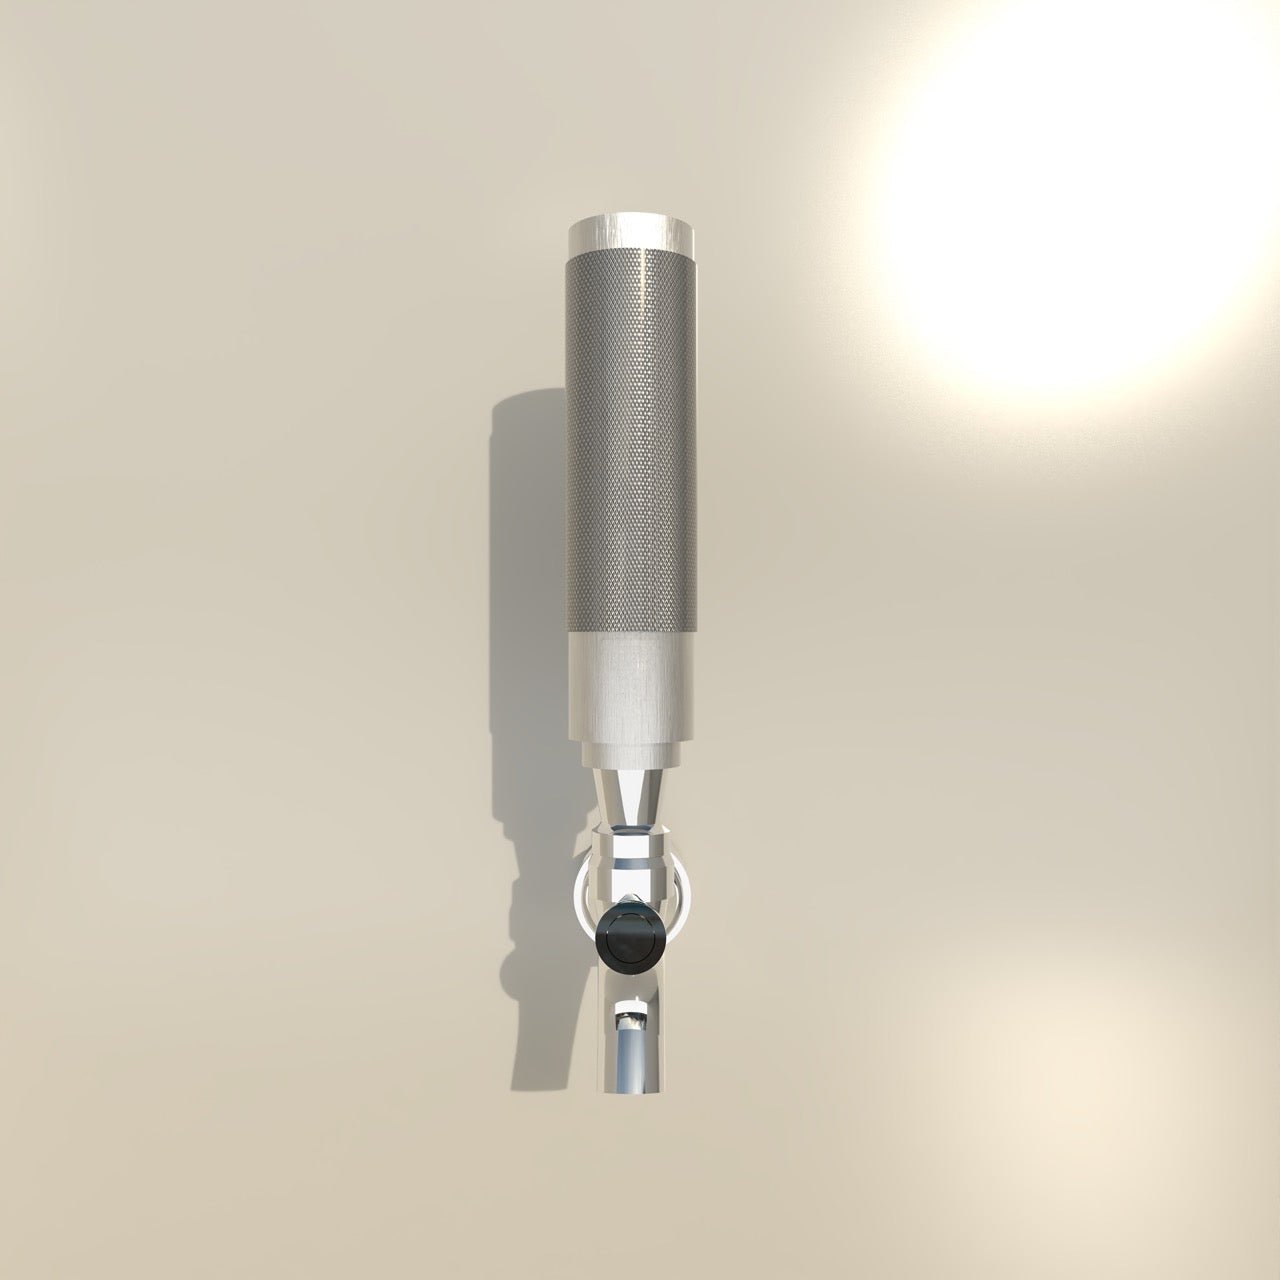 Knurled tap handle